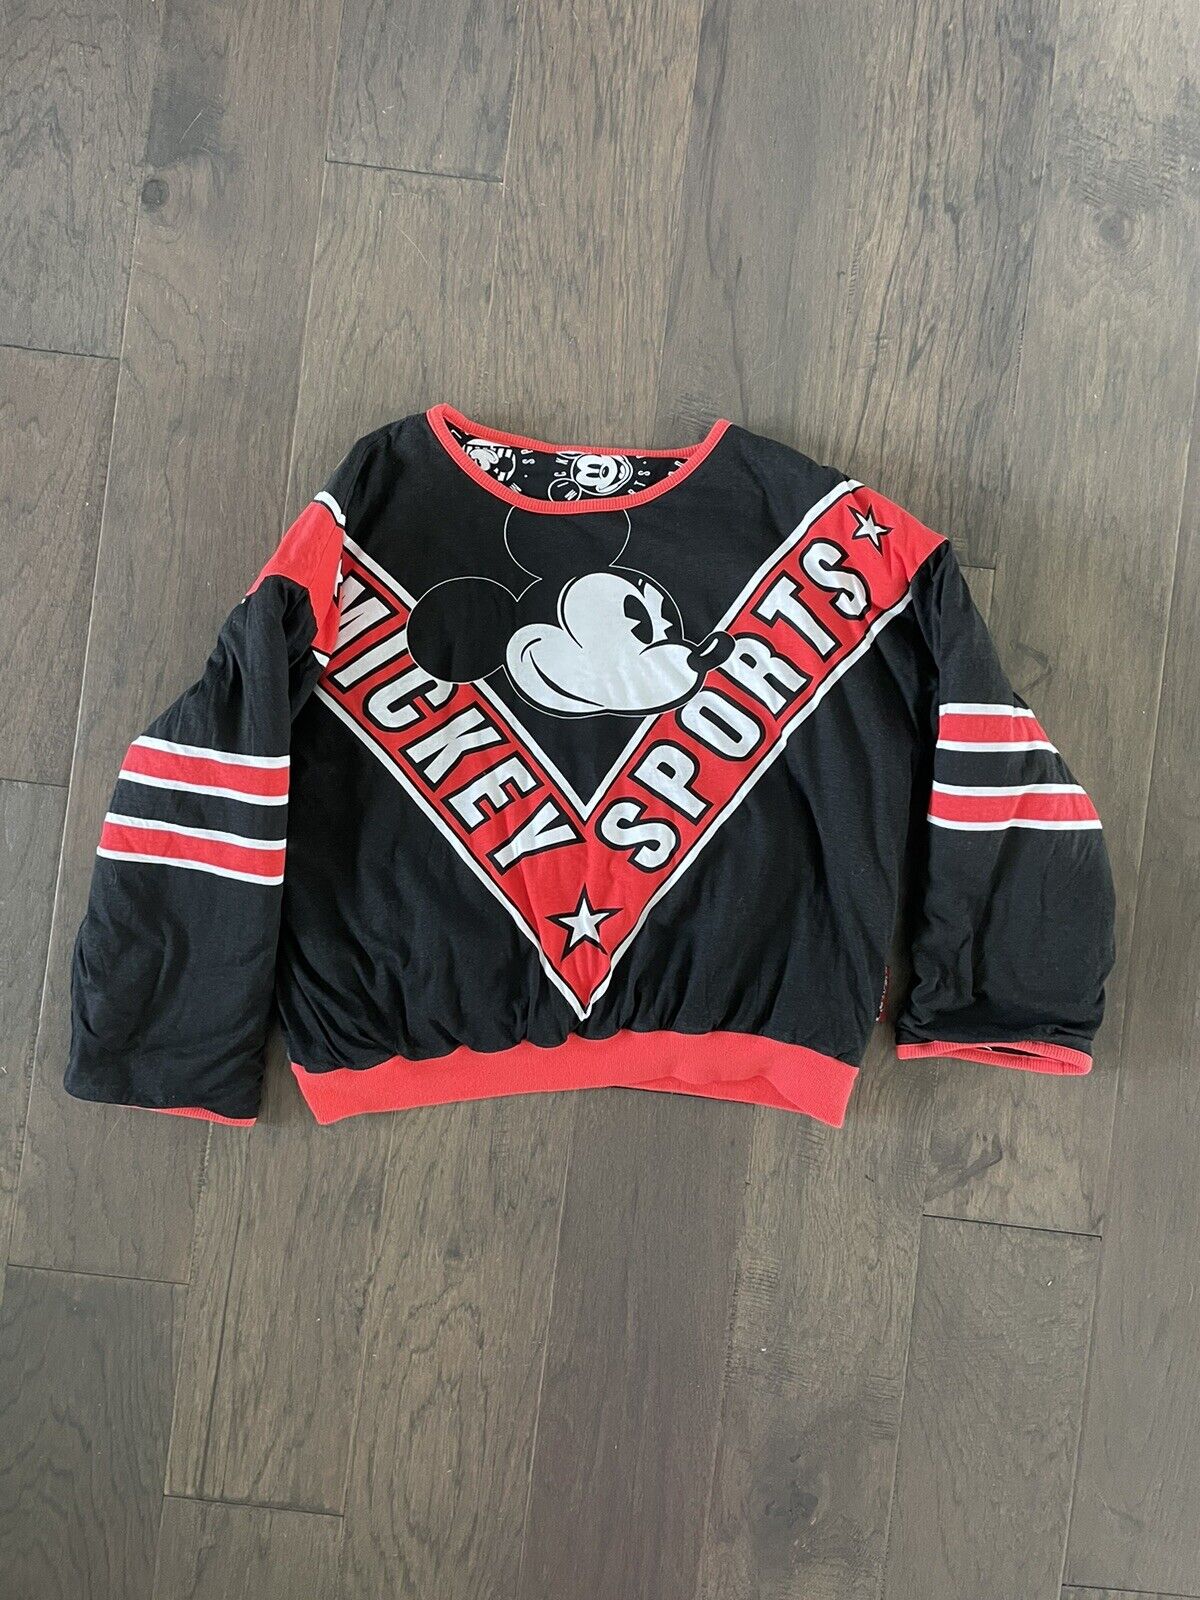 RARE Vintage Sports Disney Mickey Mouse reversible sweatshirt Too with AOP